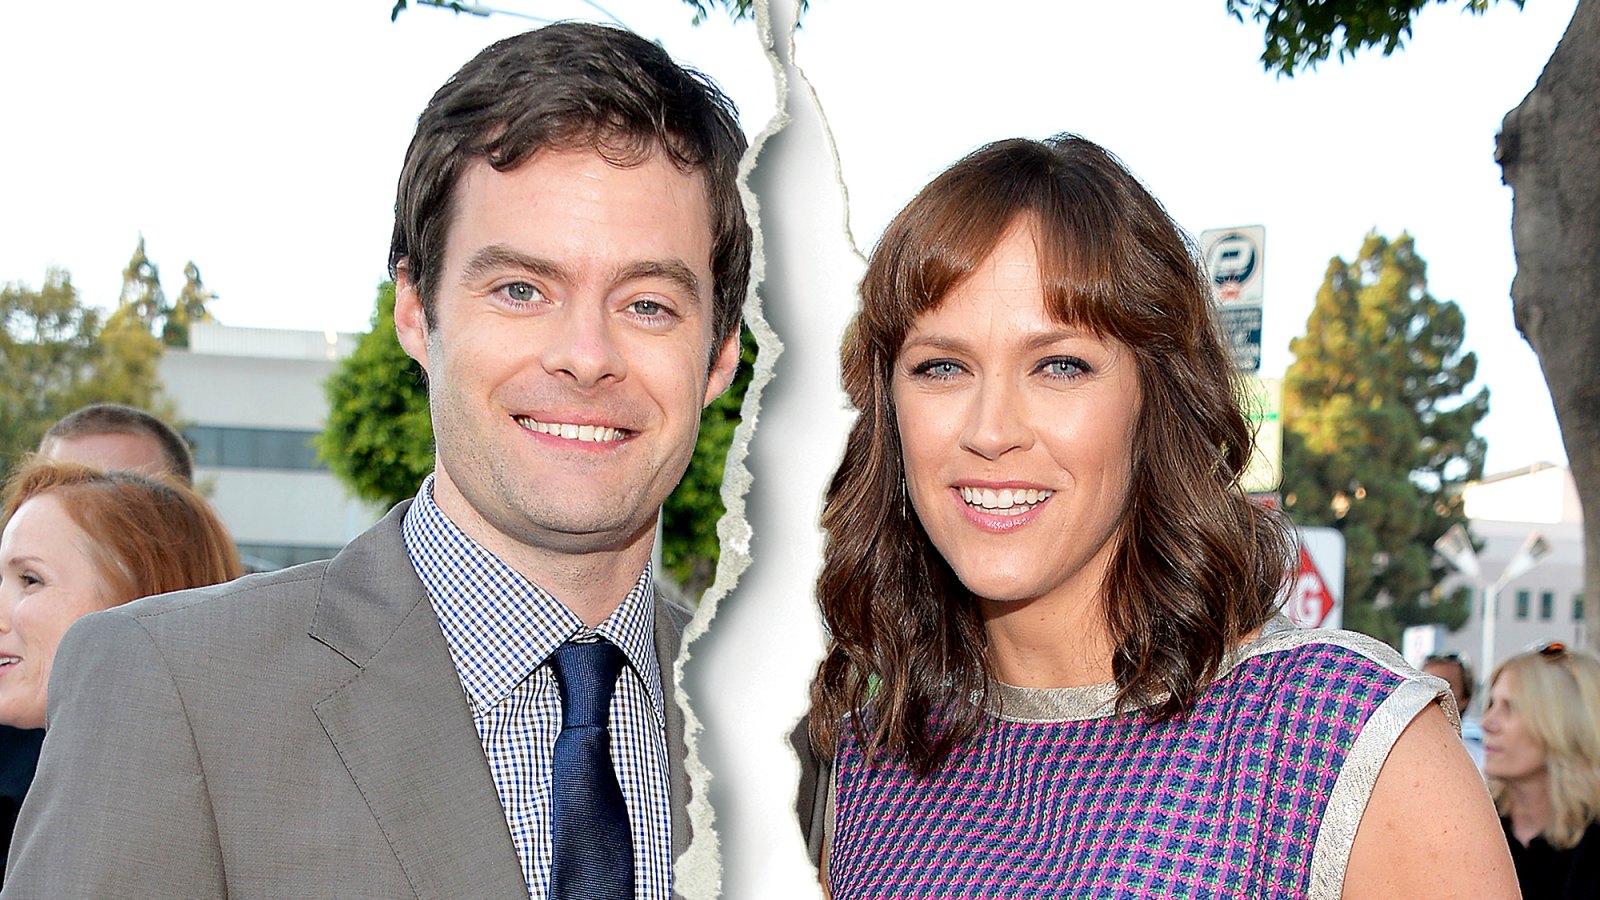 Bill Hader and Maggie Carey attend the premiere of CBS Films' "The To Do List" on July 23, 2013 in Westwood, California.